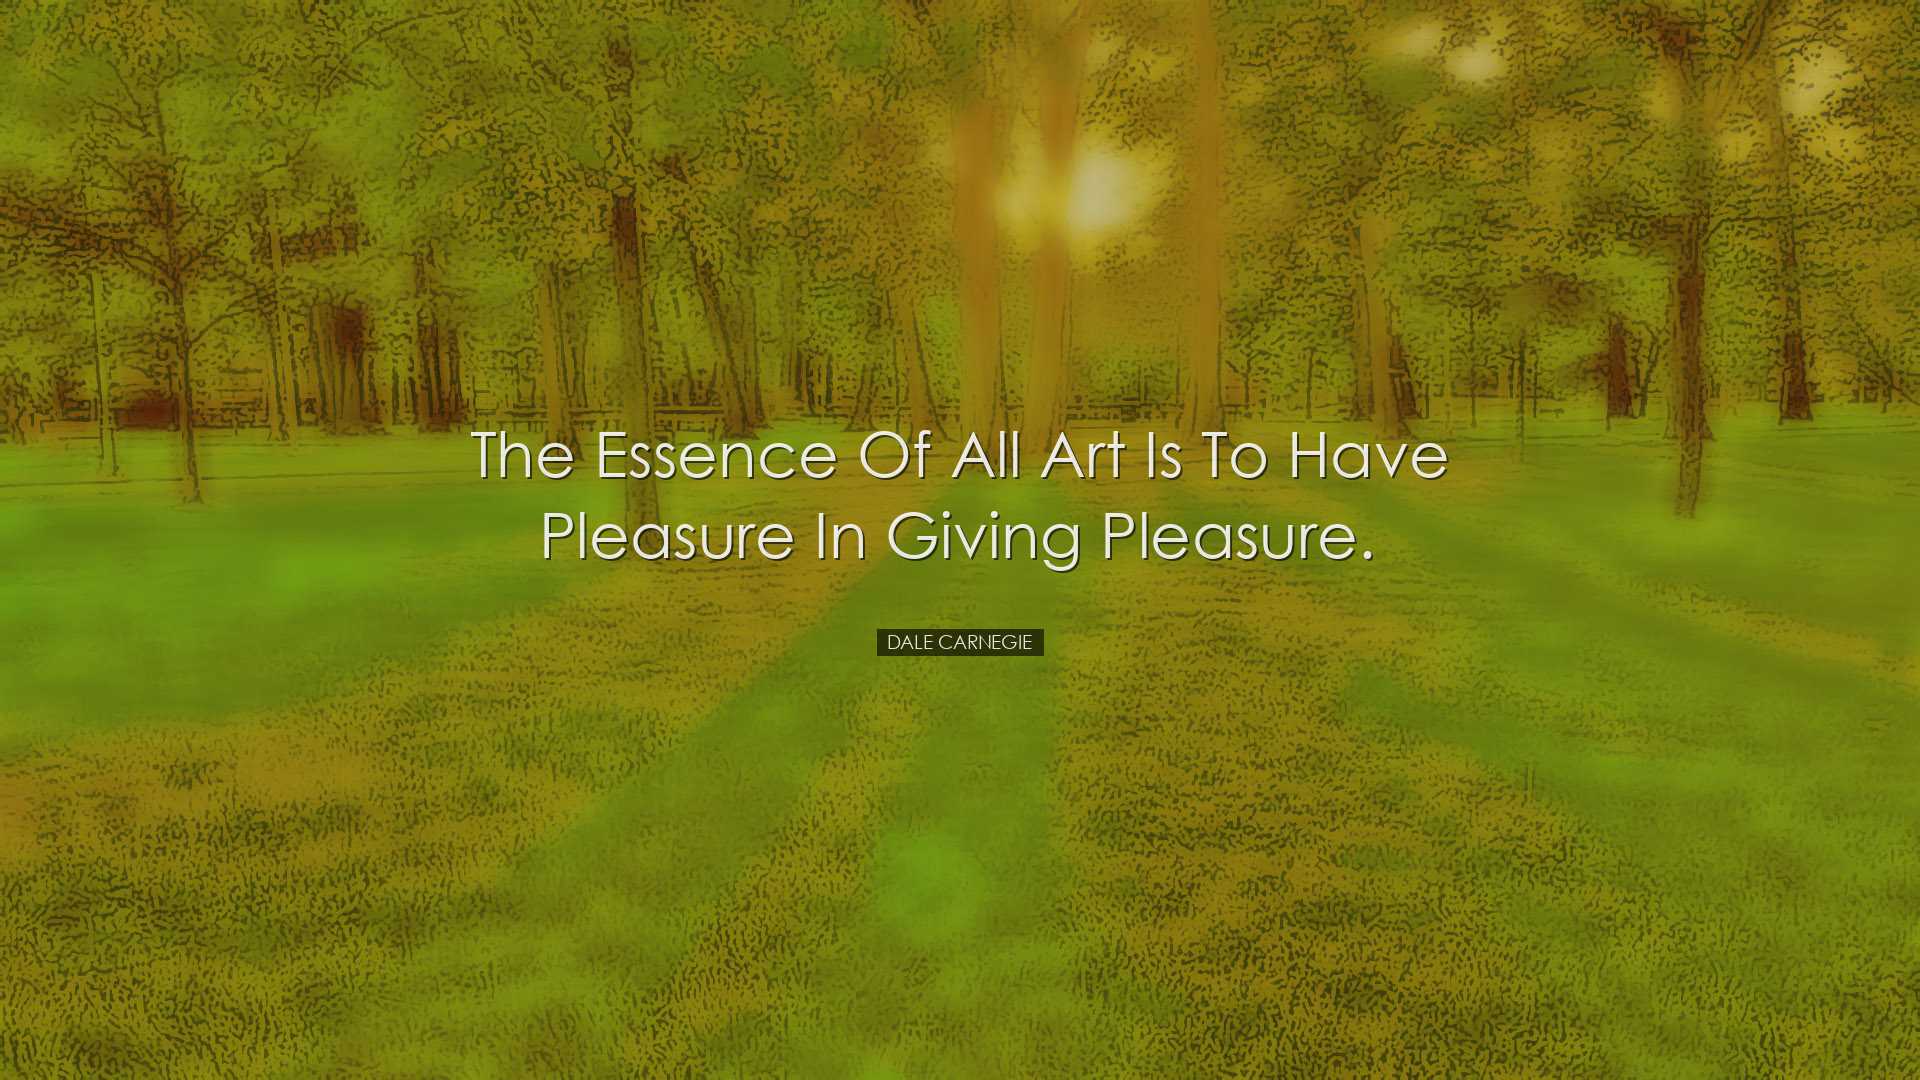 The essence of all art is to have pleasure in giving pleasure. - D